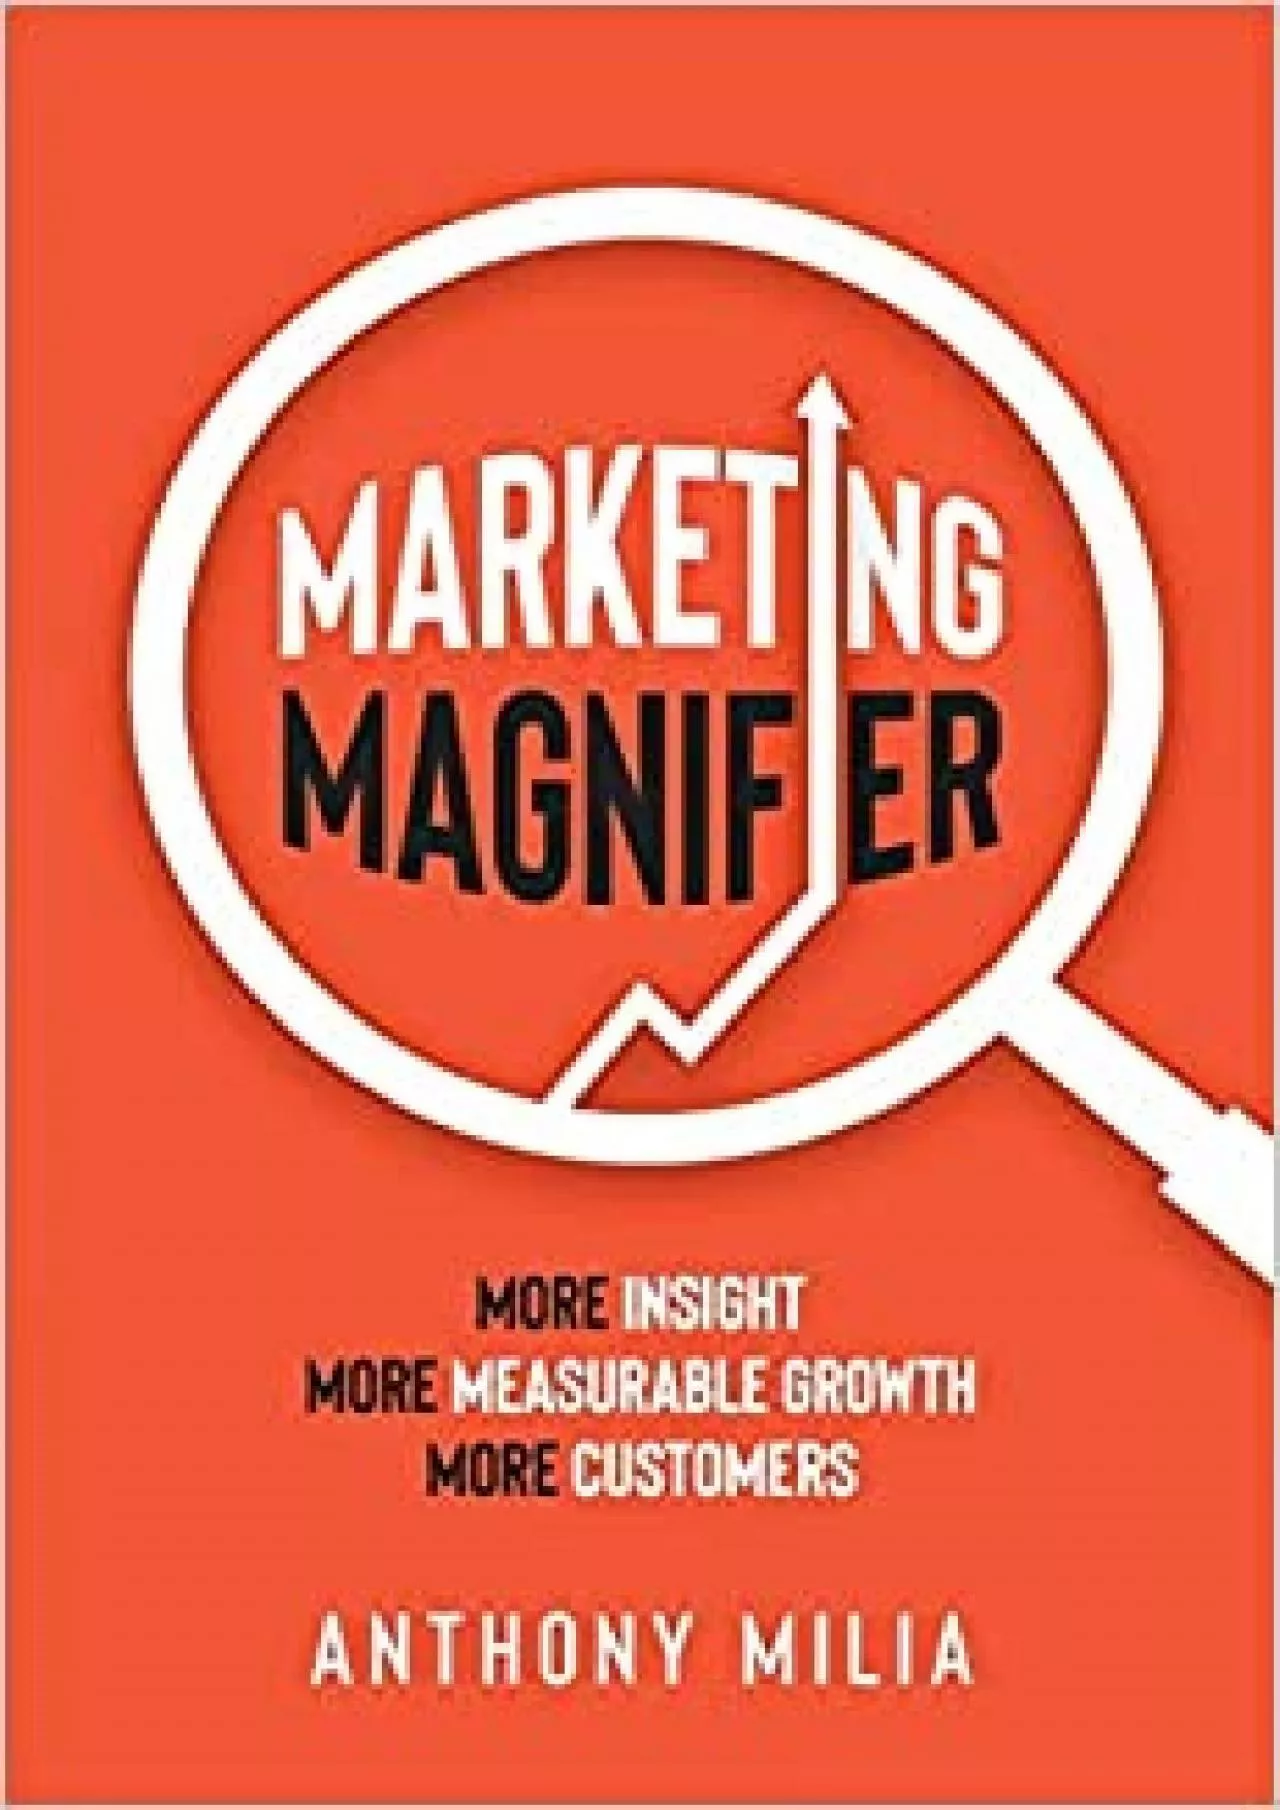 Marketing Magnifier More Insight. More Measurable Growth. More Customers